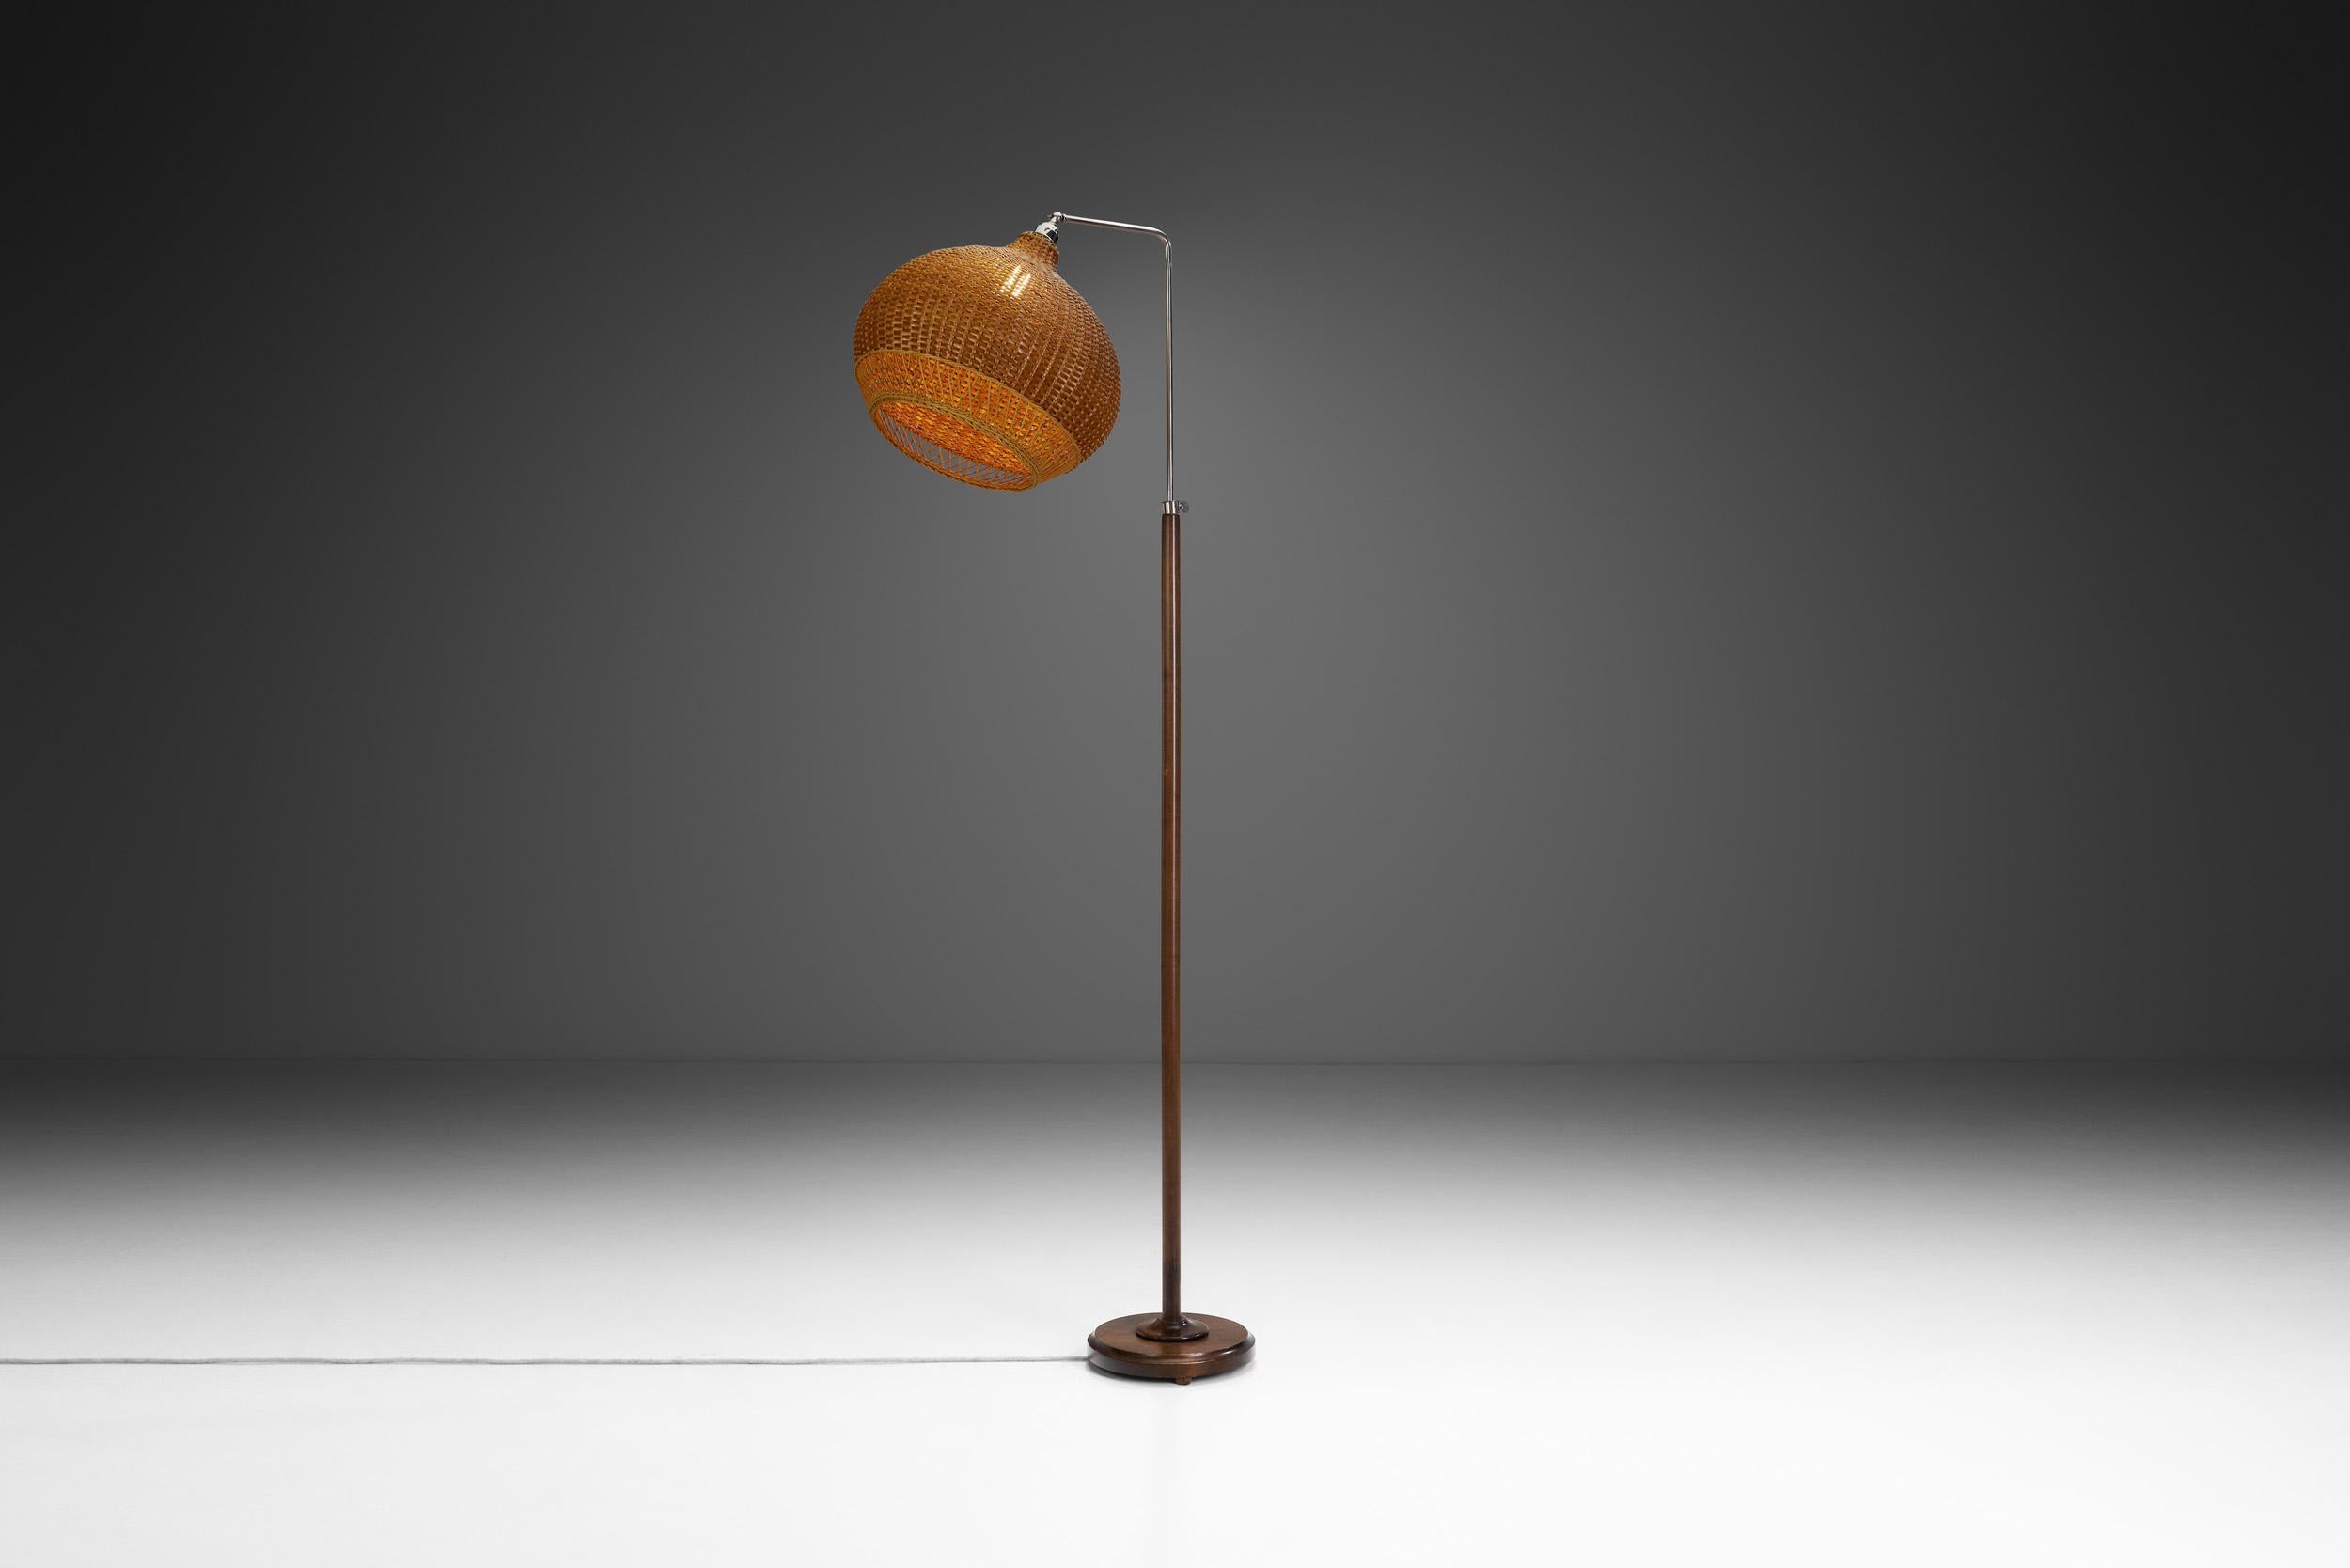 Idman Oy, the legendary Finnish design company founded in 1909, gained a reputation for producing high-quality furniture and lighting pieces that embodied the principles of functionality and aesthetic simplicity. This Model 60442 floor lamp is a